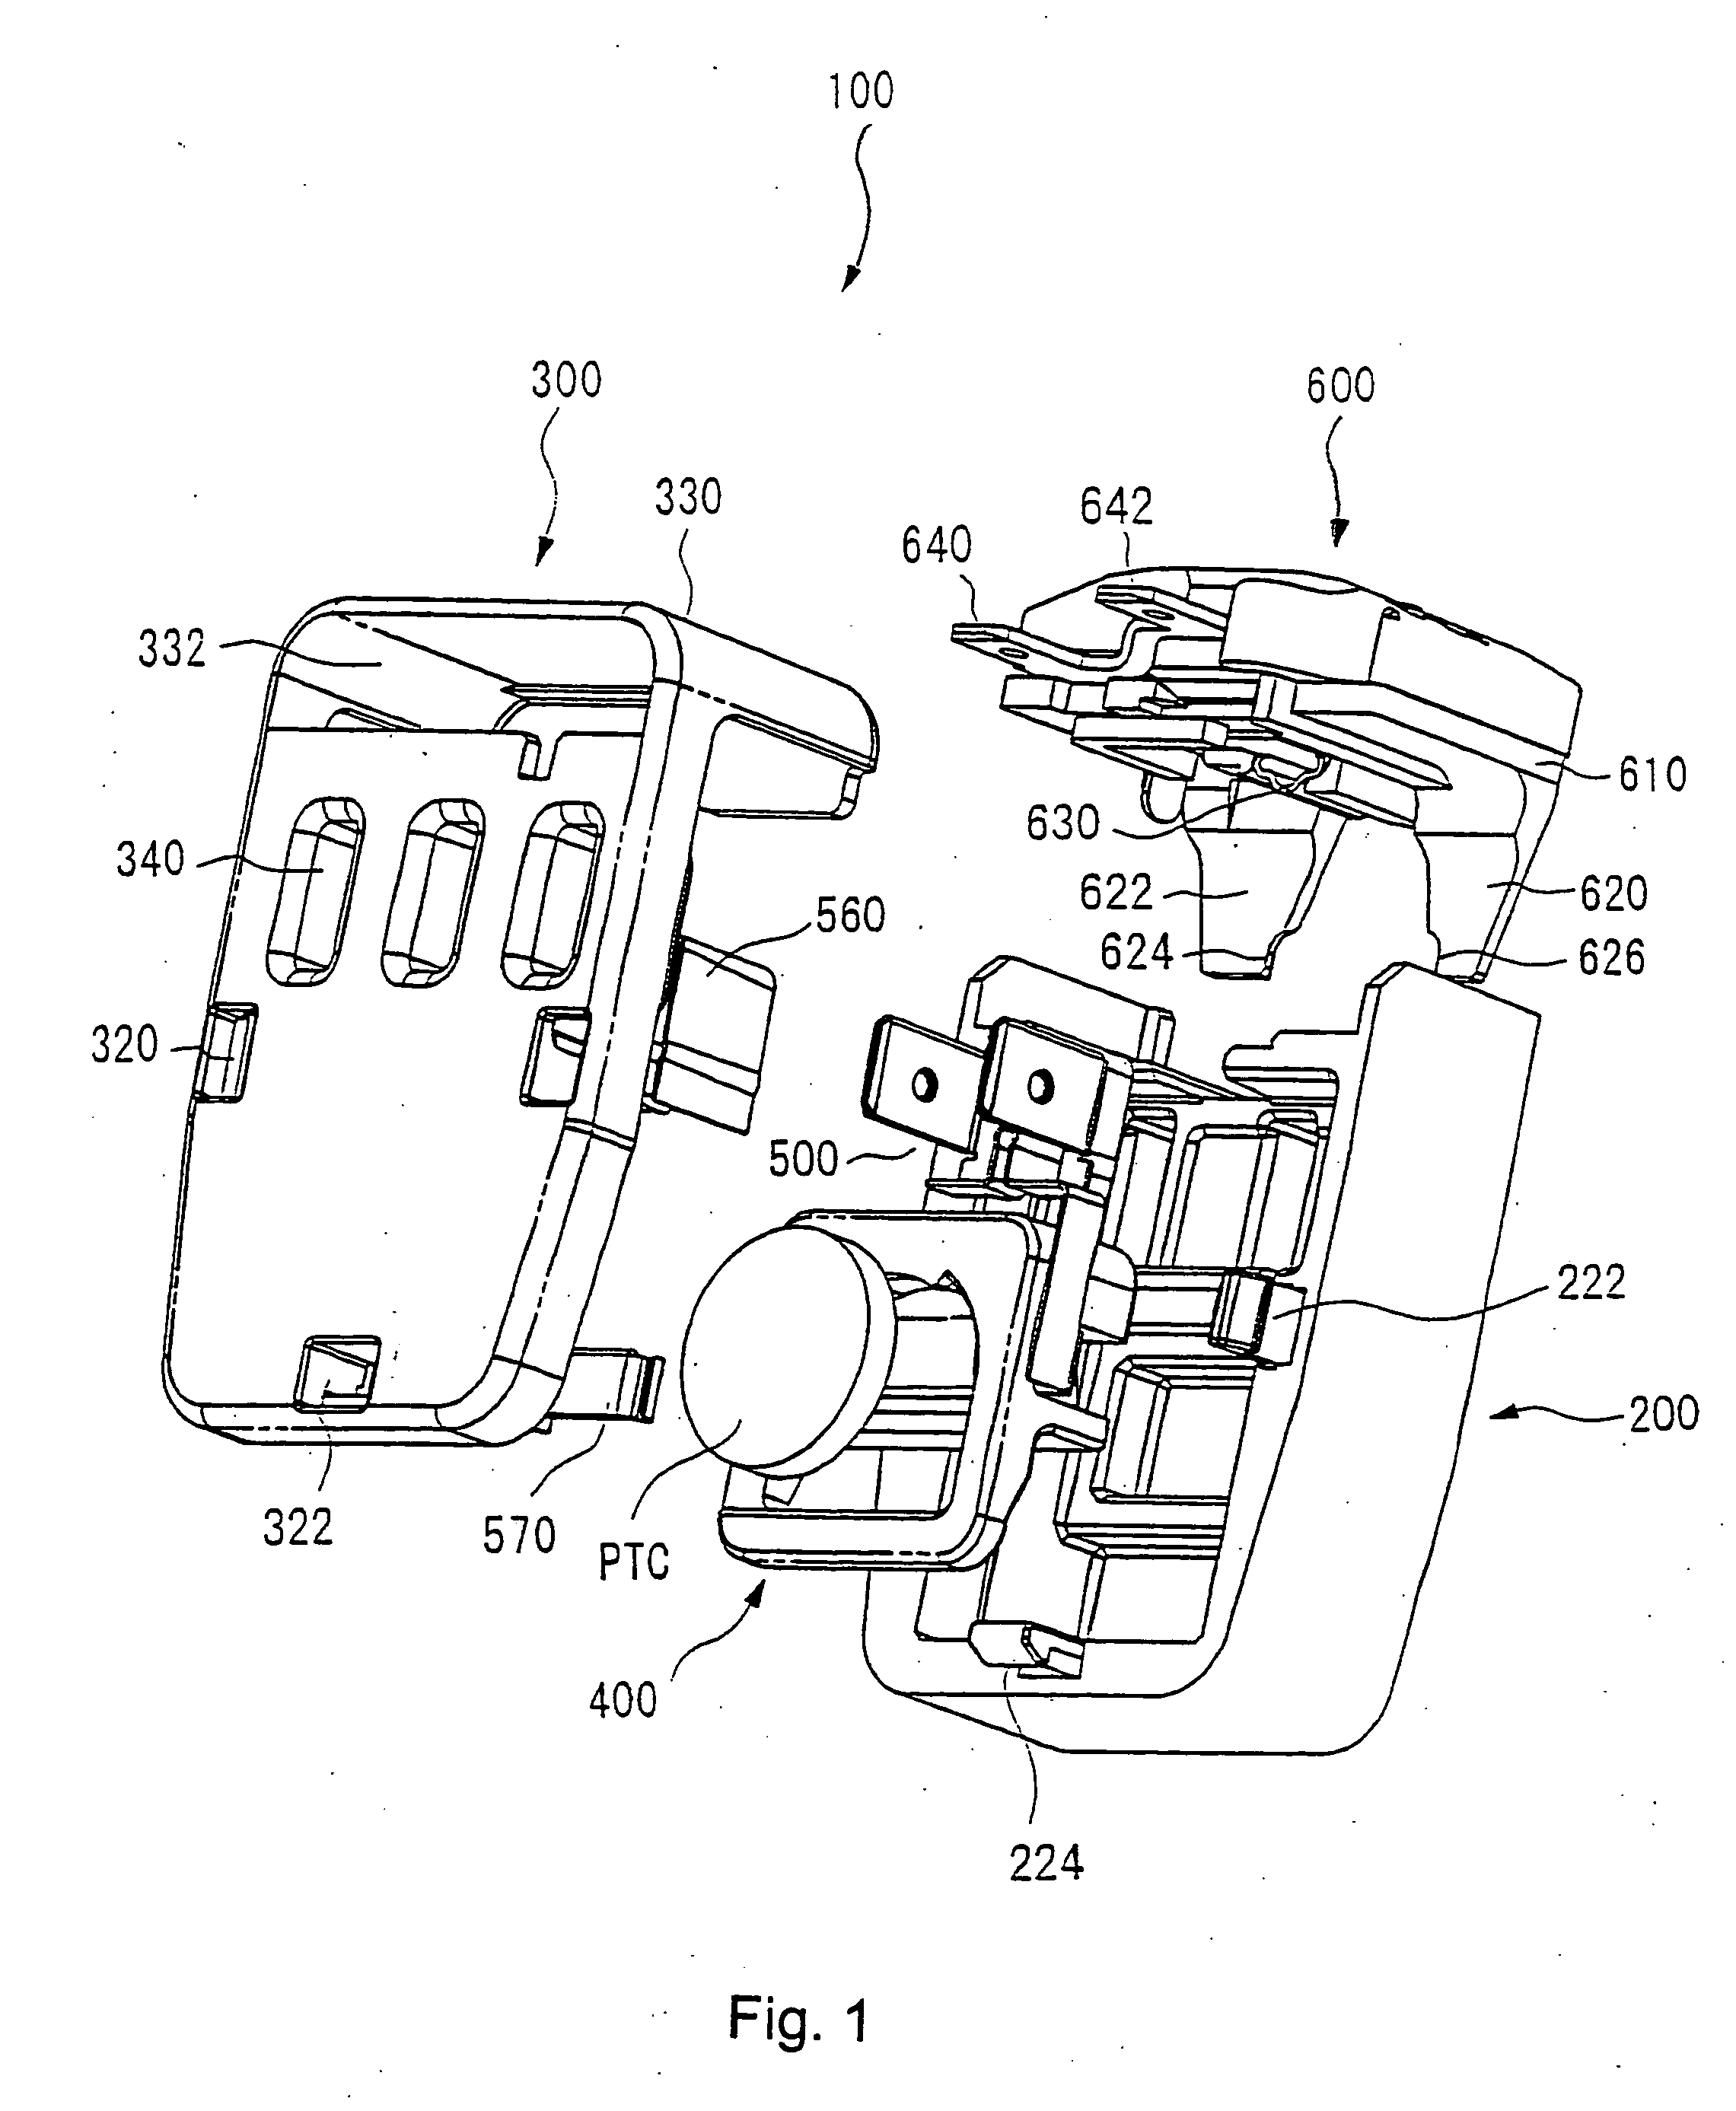 Motor start relay and an electric compressor using same